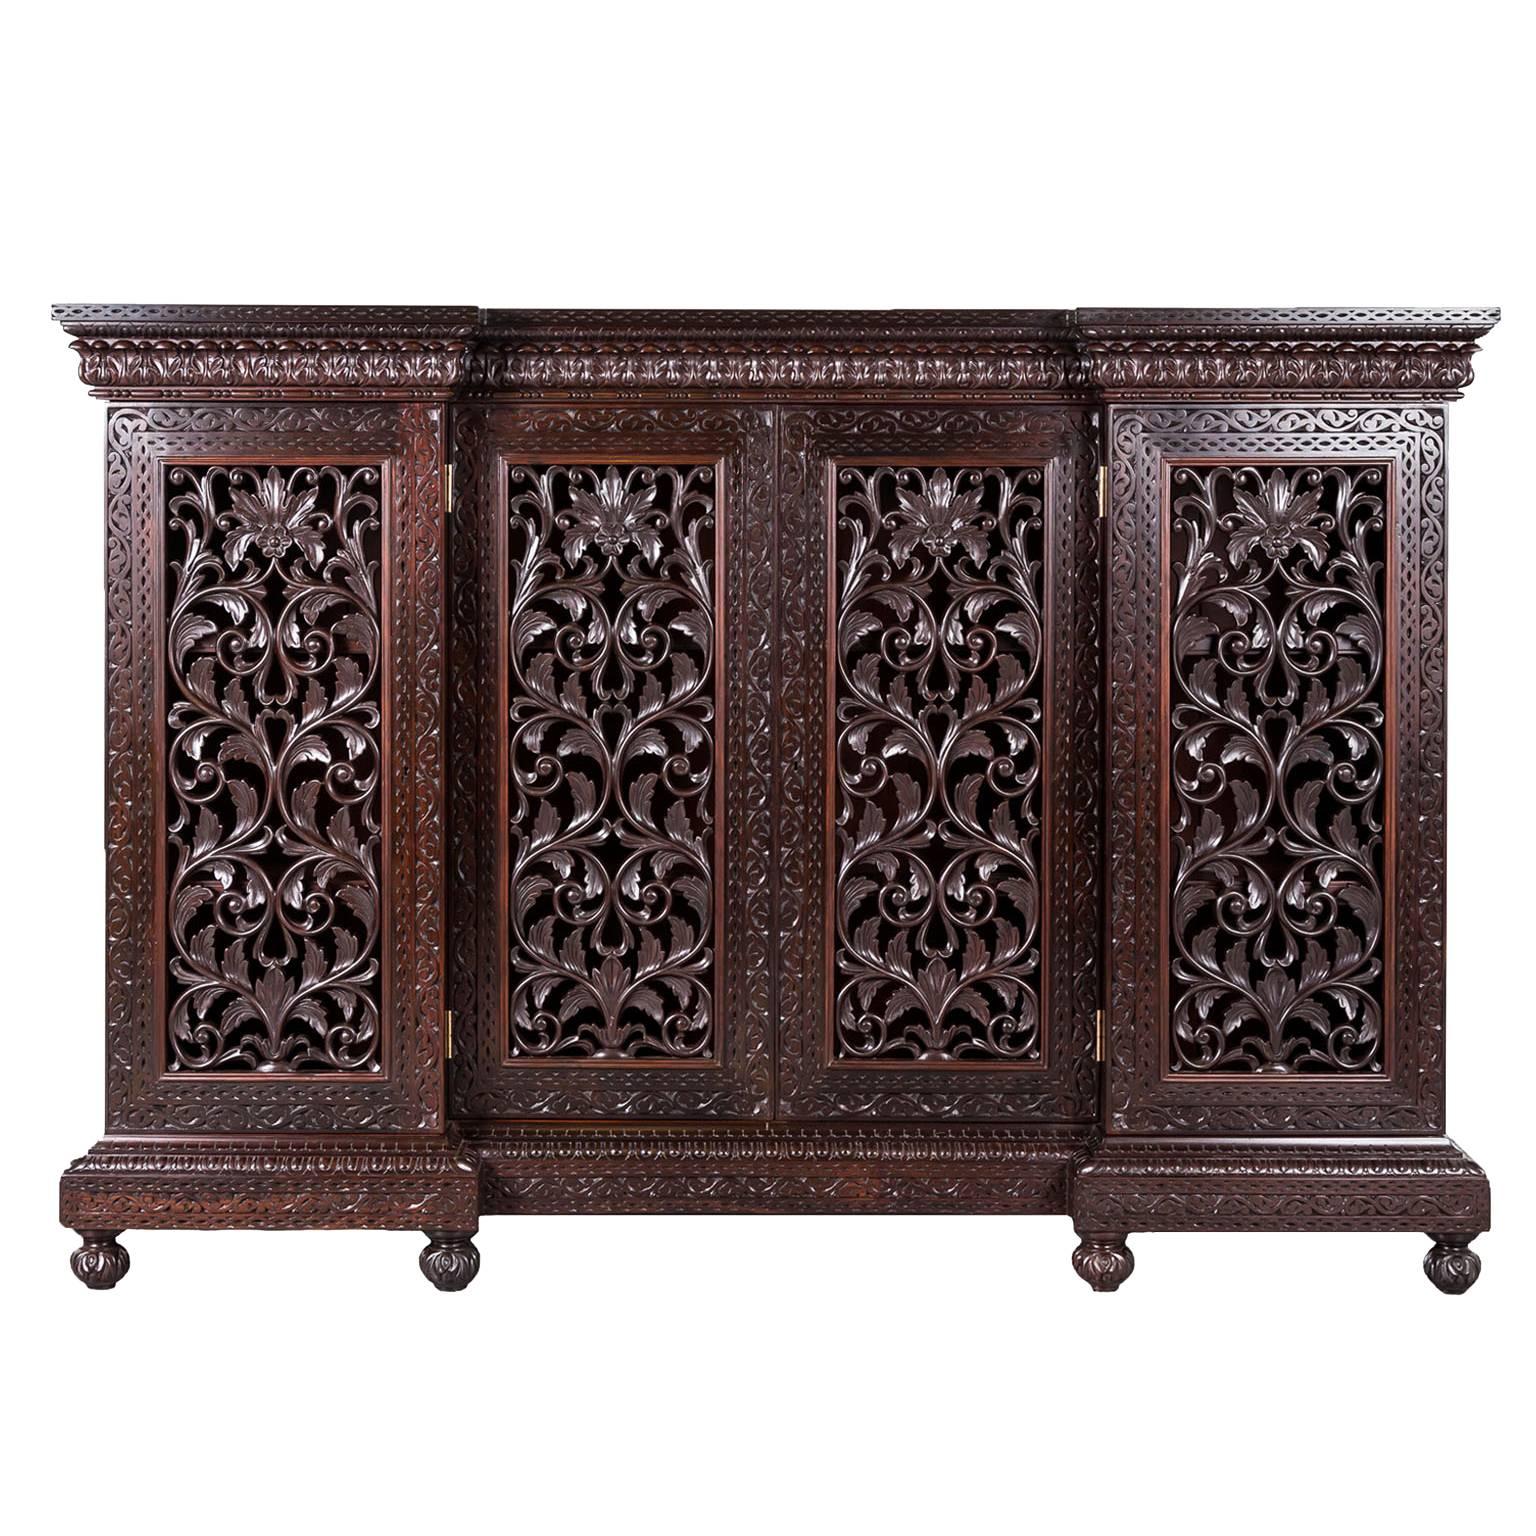 Anglo-Indian or British Colonial Rosewood Breakfront Cabinet